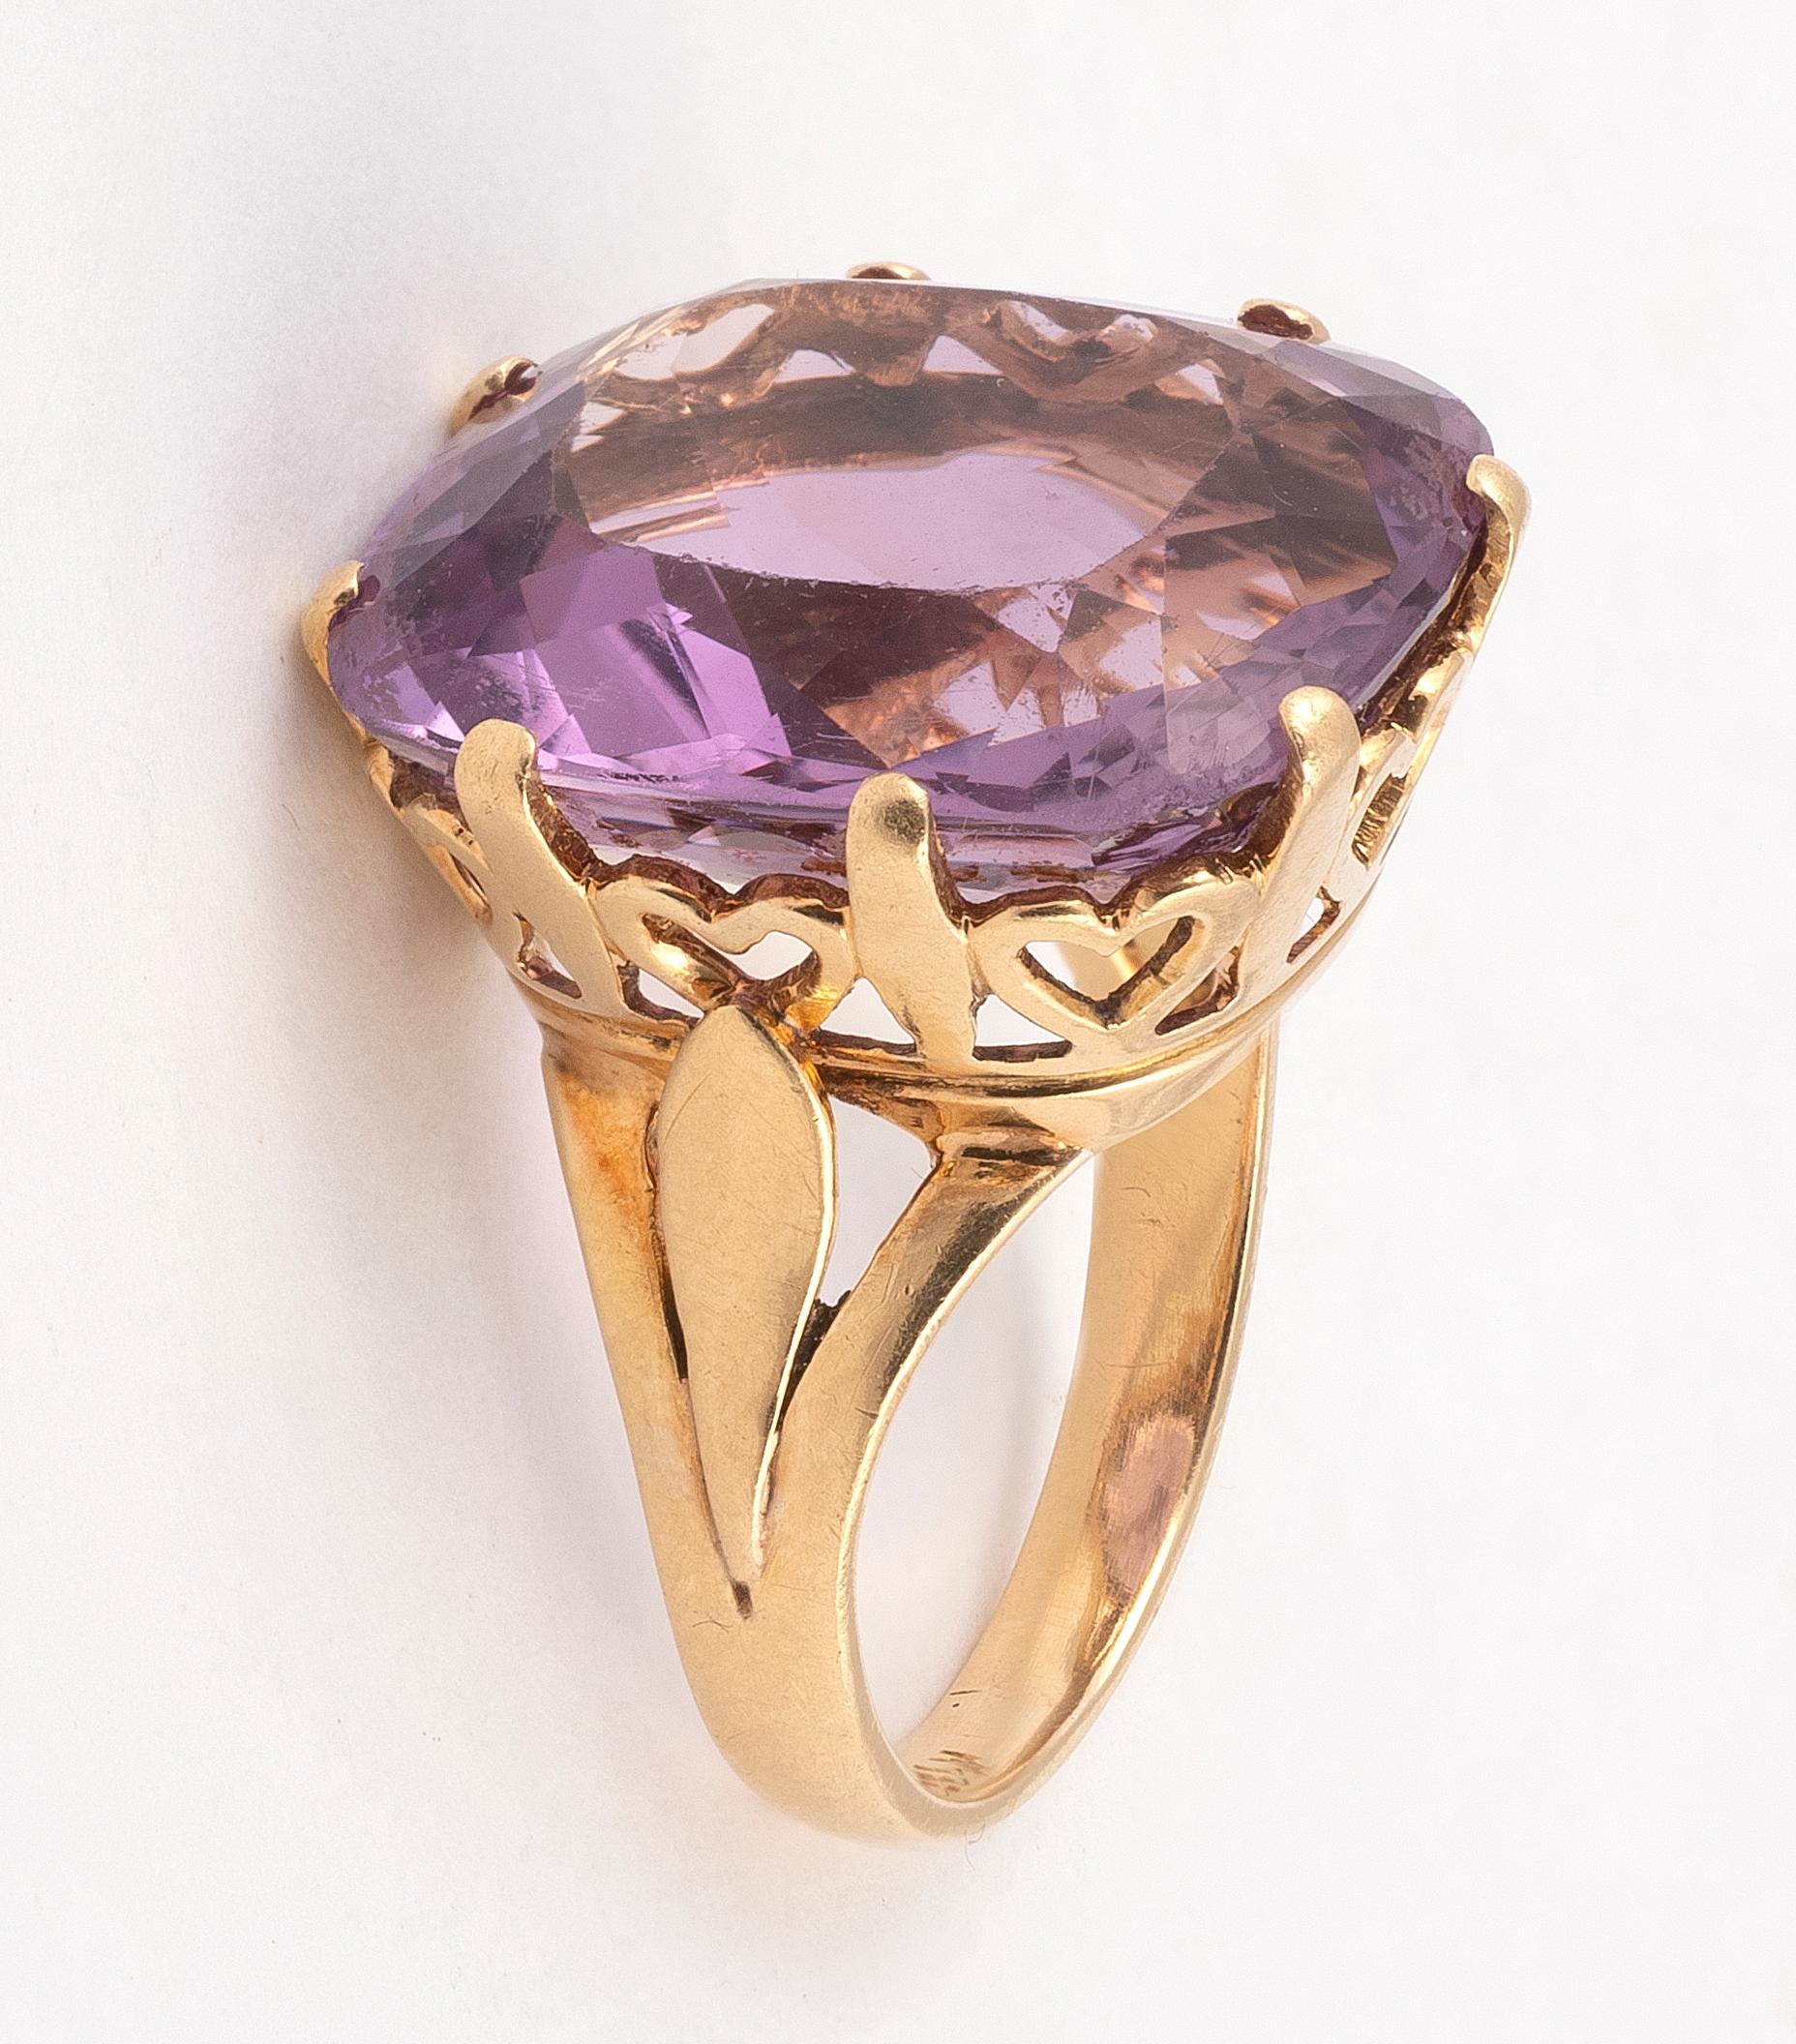 The cushion-shaped mixed-cut amethyst in a claw-setting, the openwork mount and band composed of heart wirework, ring size 7